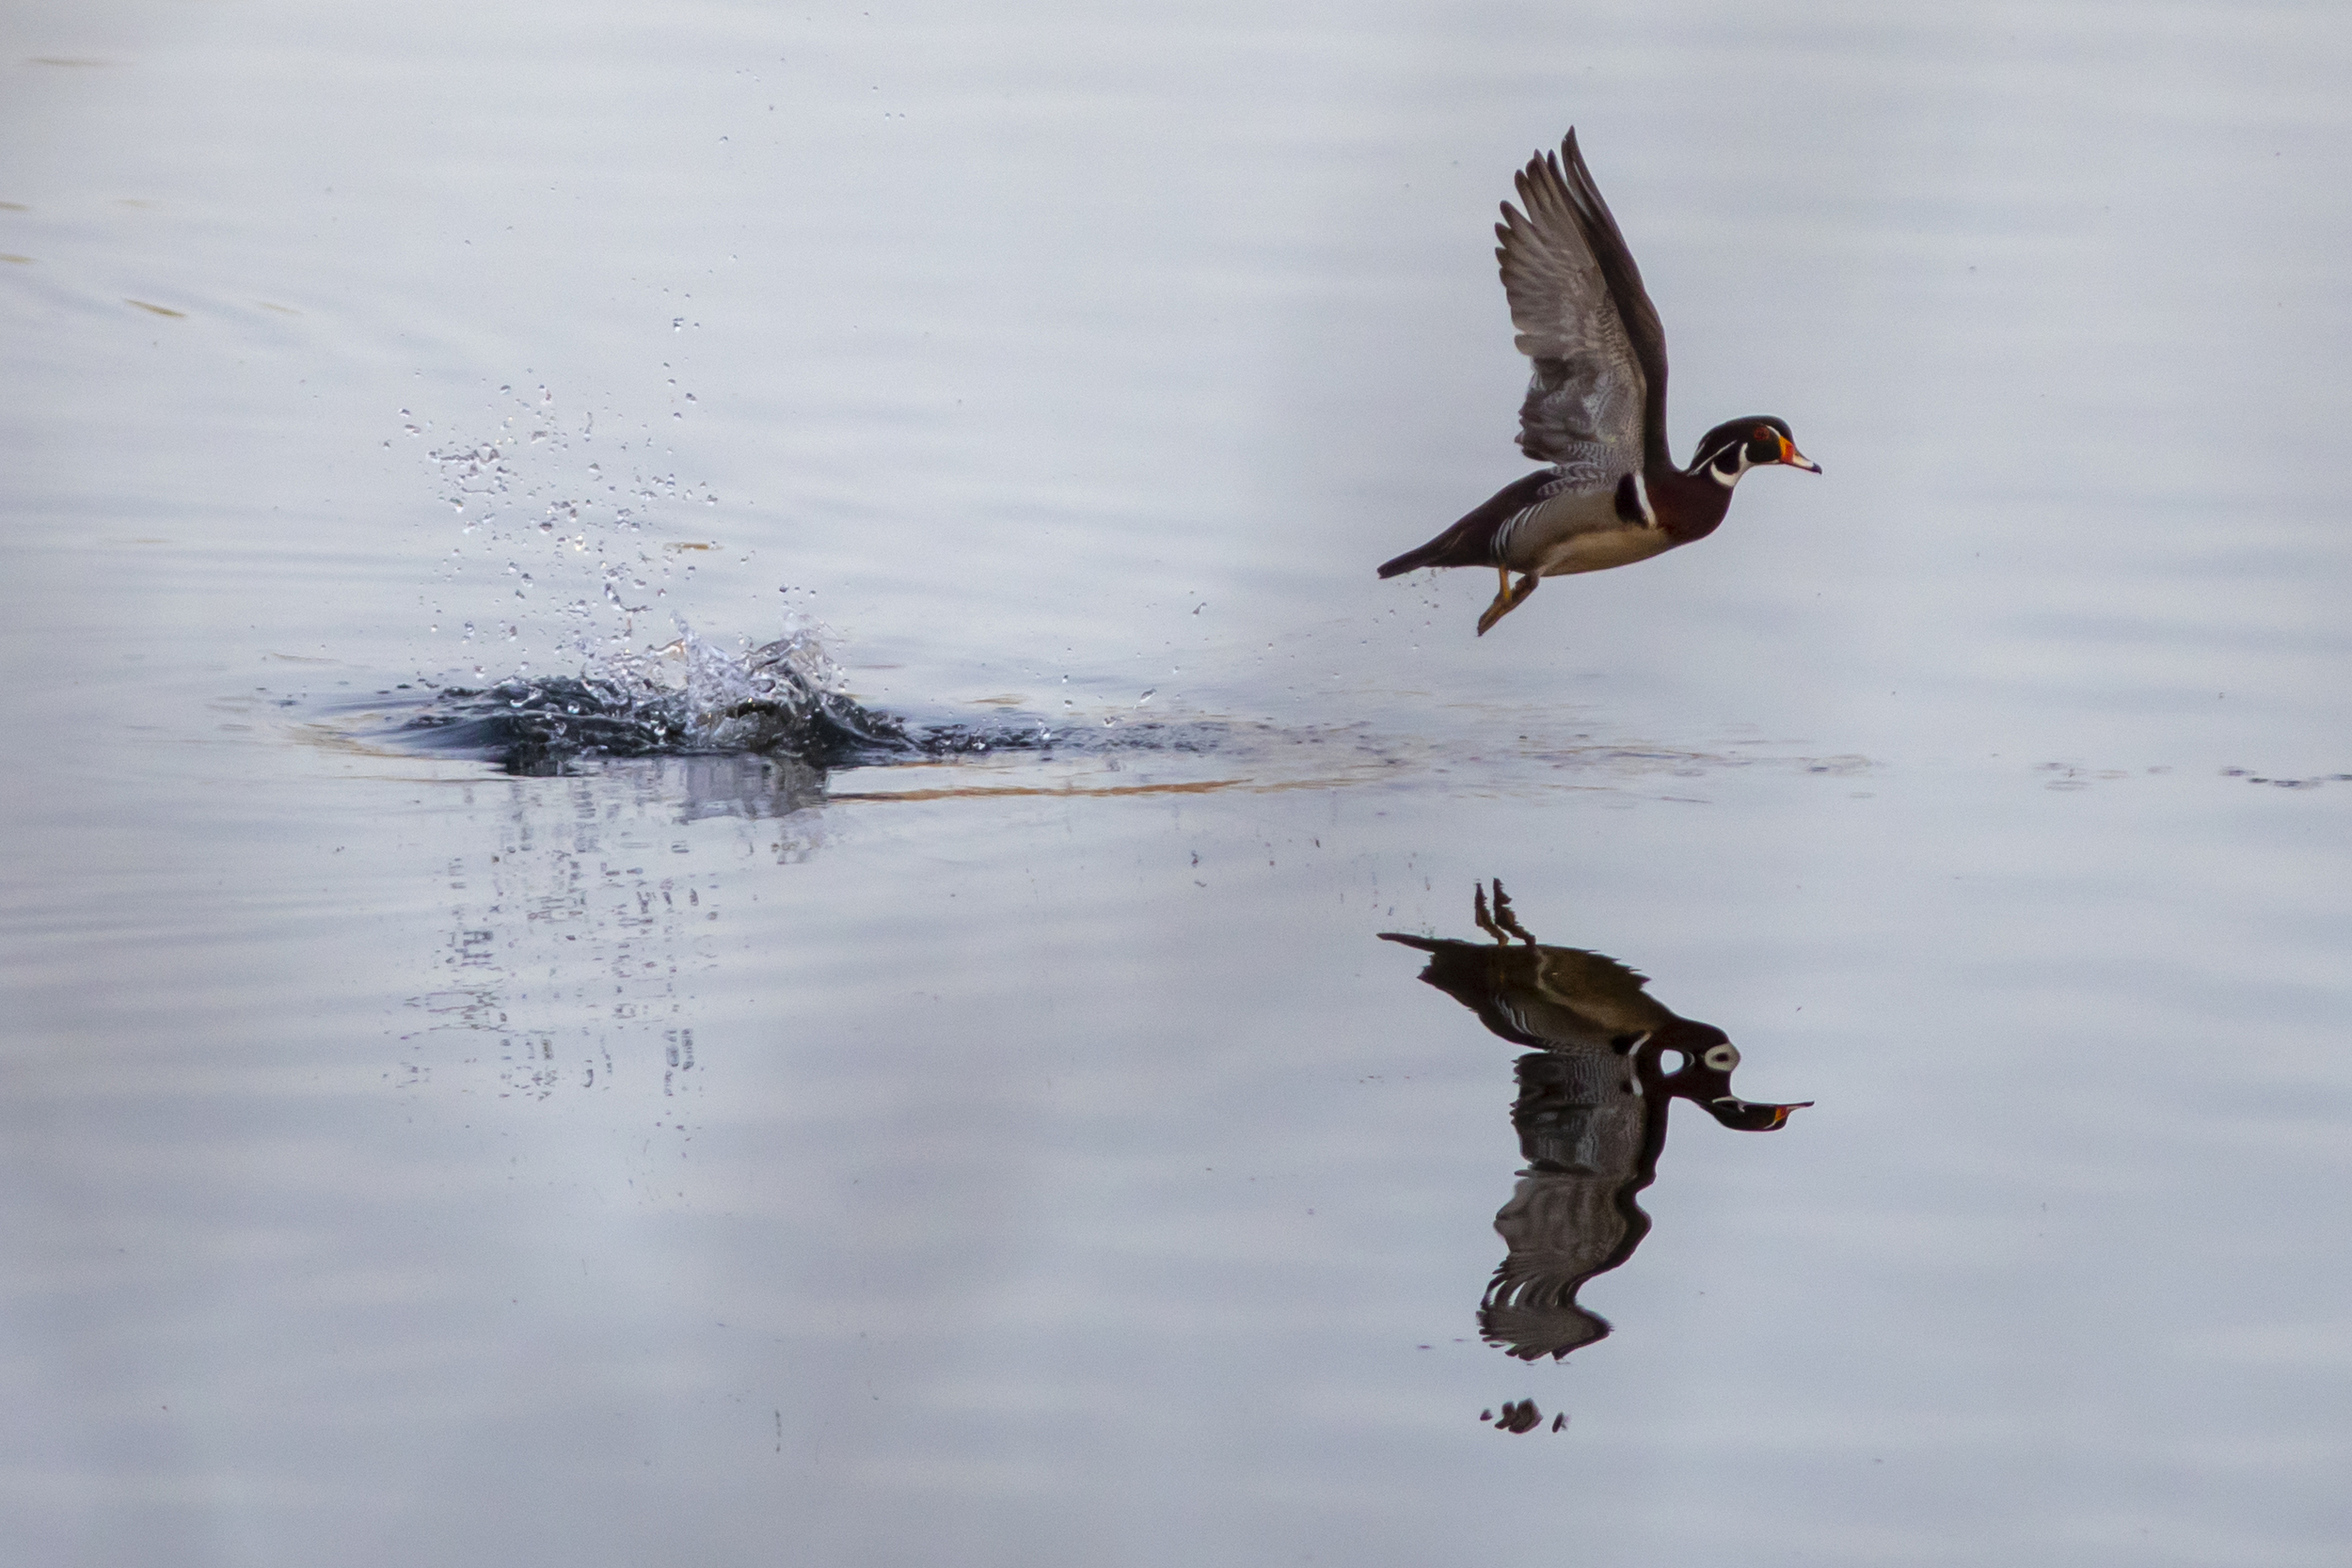 A wood duck, which has funky orange and iridescent green markings on its head, takes off from the water with a splash